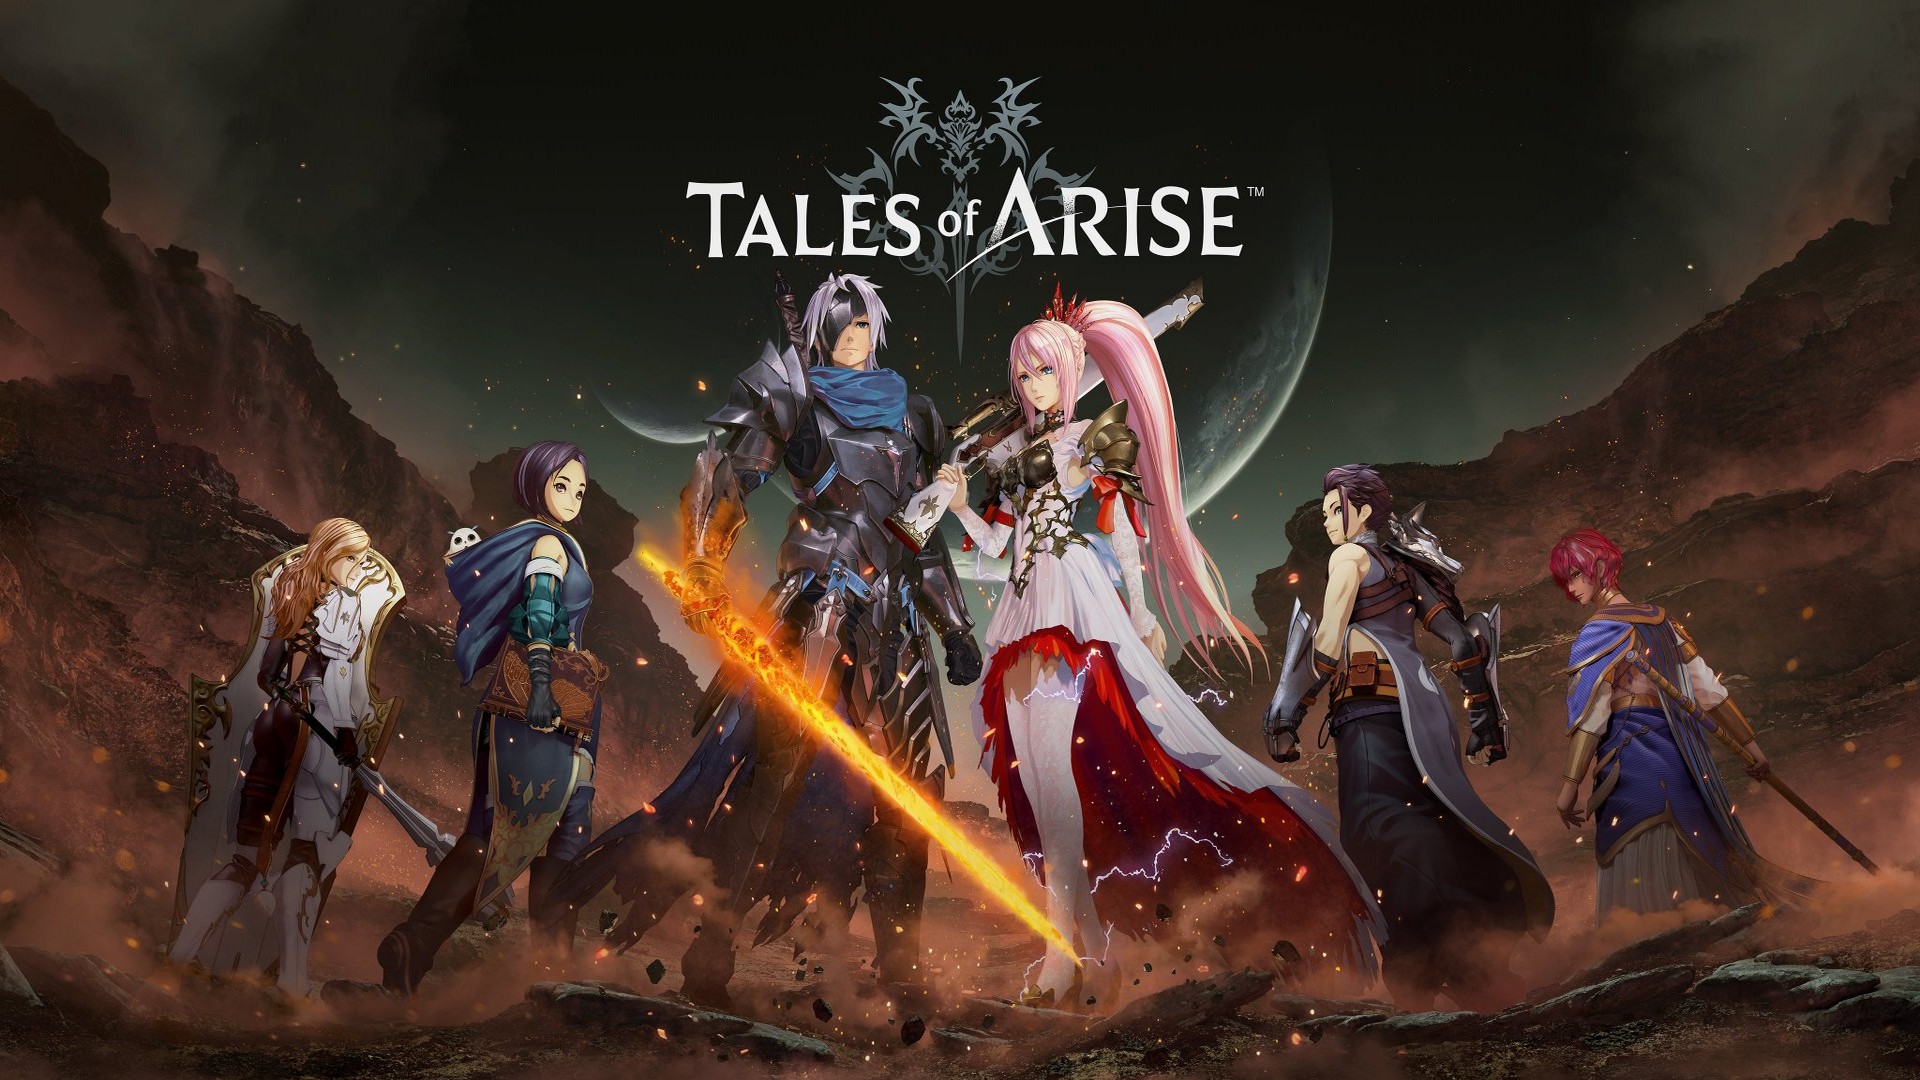 Discover a New Tales of Arise Trailer From Ufotable, Along With The New Gallery App Available For Free On PlayStation and Xbox